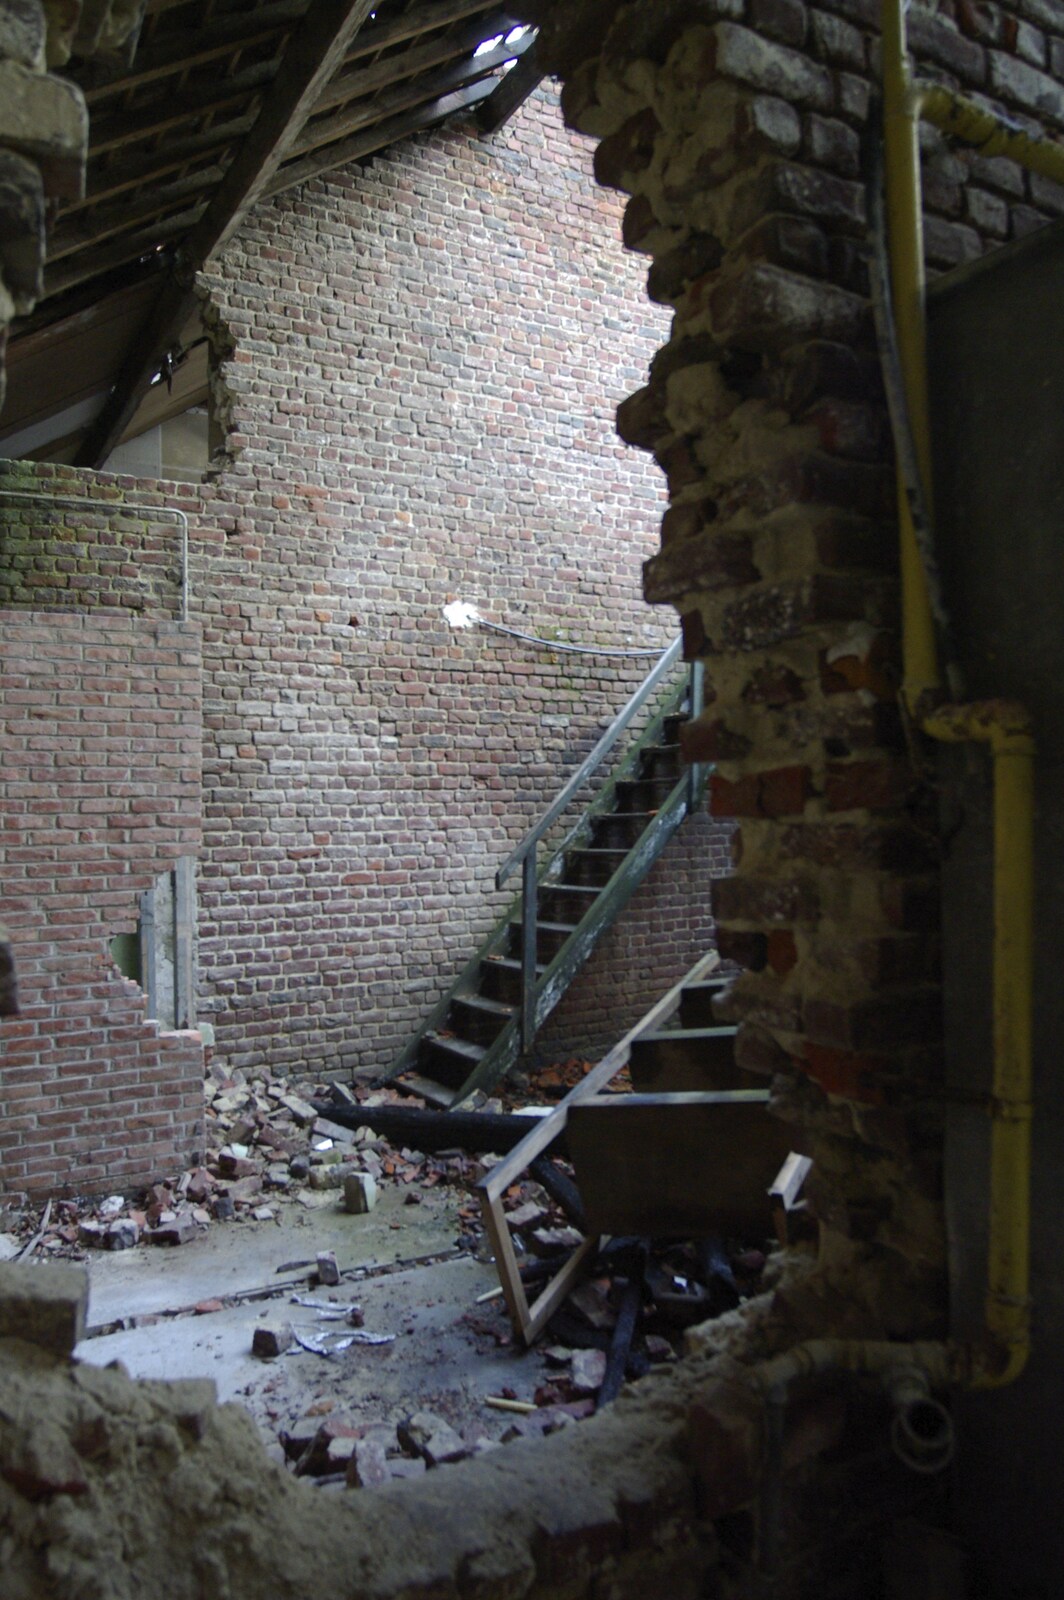 Broken walls and a staircase to nowhere from The Christmas Markets of Brussels, Belgium - 1st January 2007